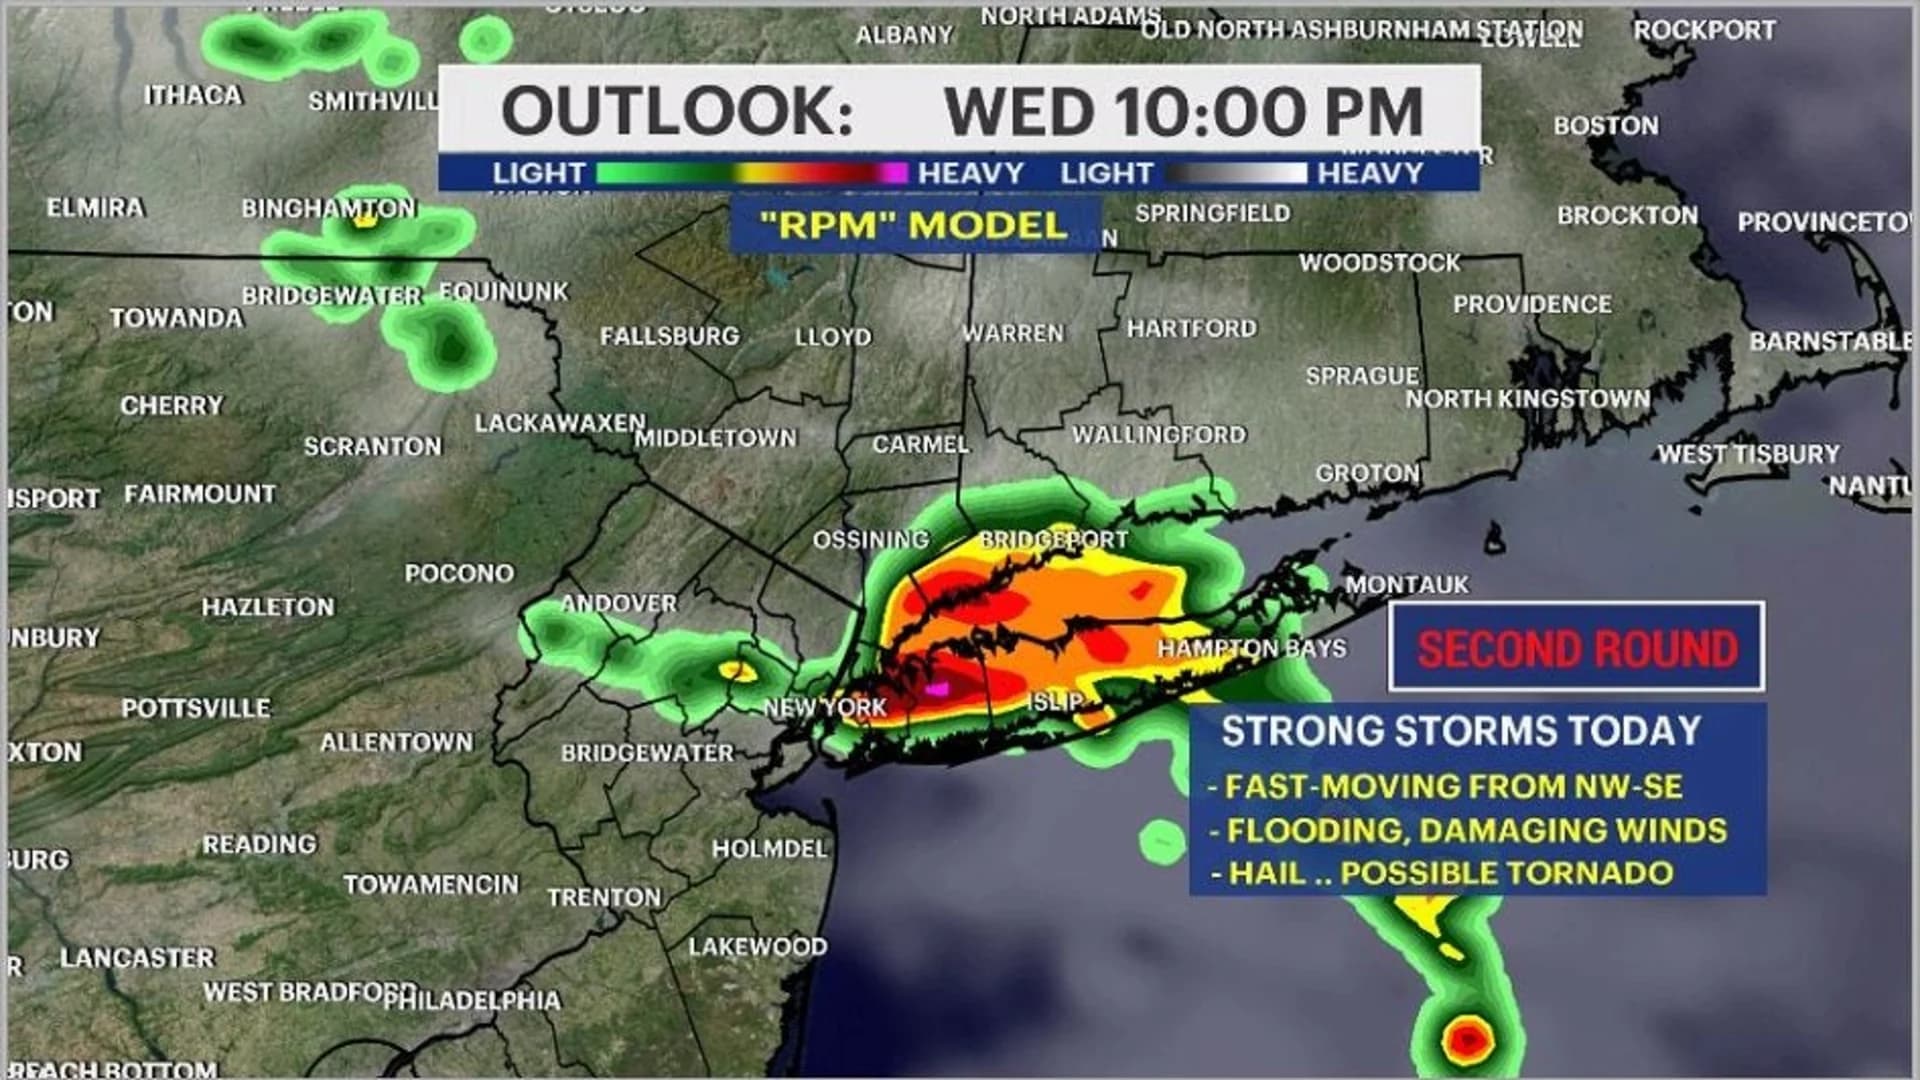 Severe thunderstorms bring damaging winds, hail